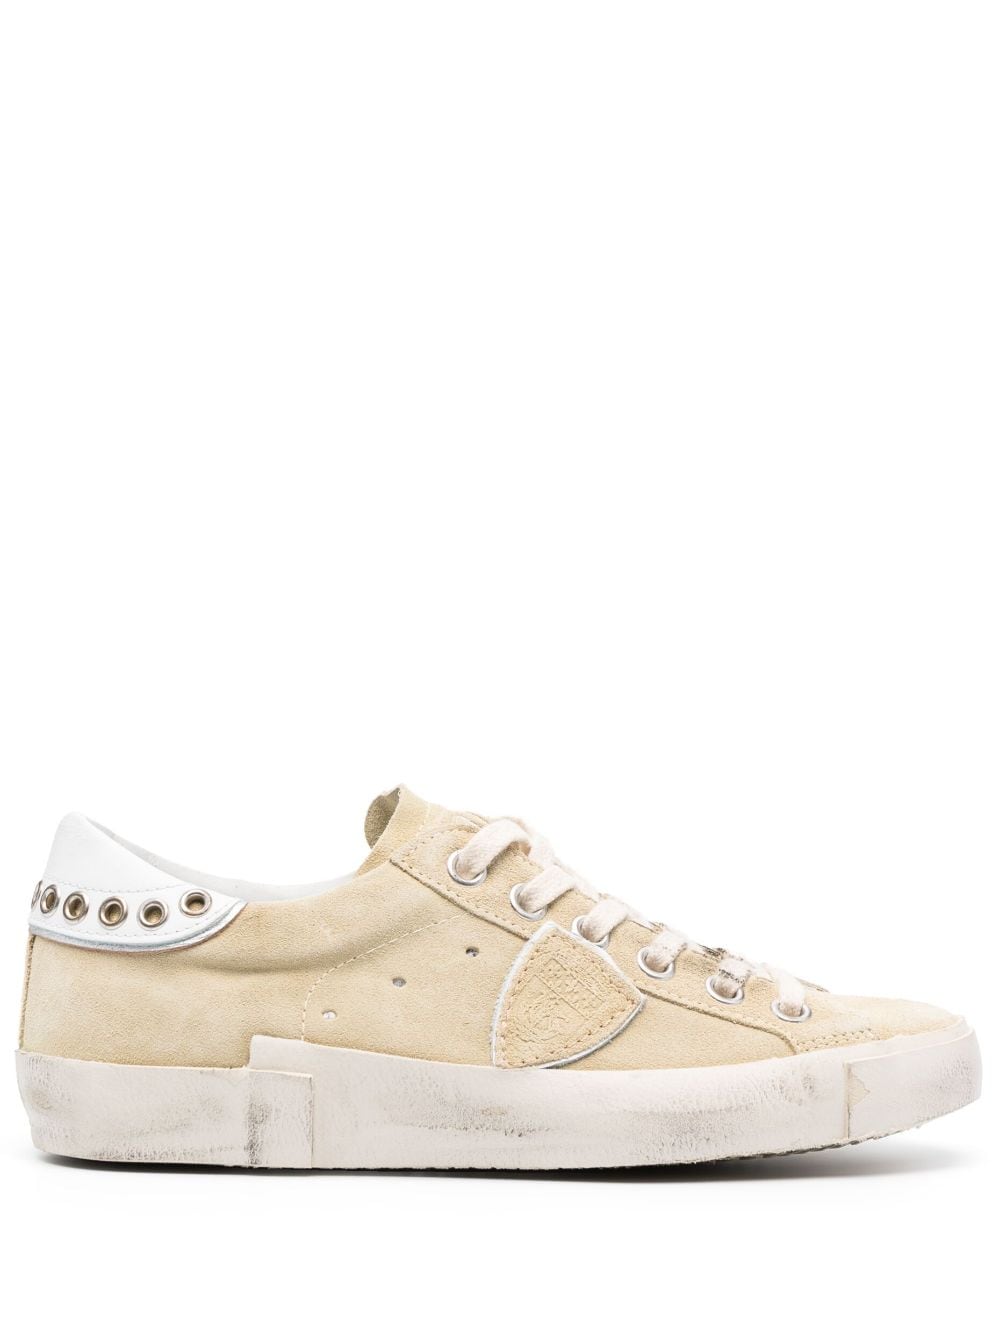 Philippe Model Paris Prsx Leather Low-top Sneakers In Nude